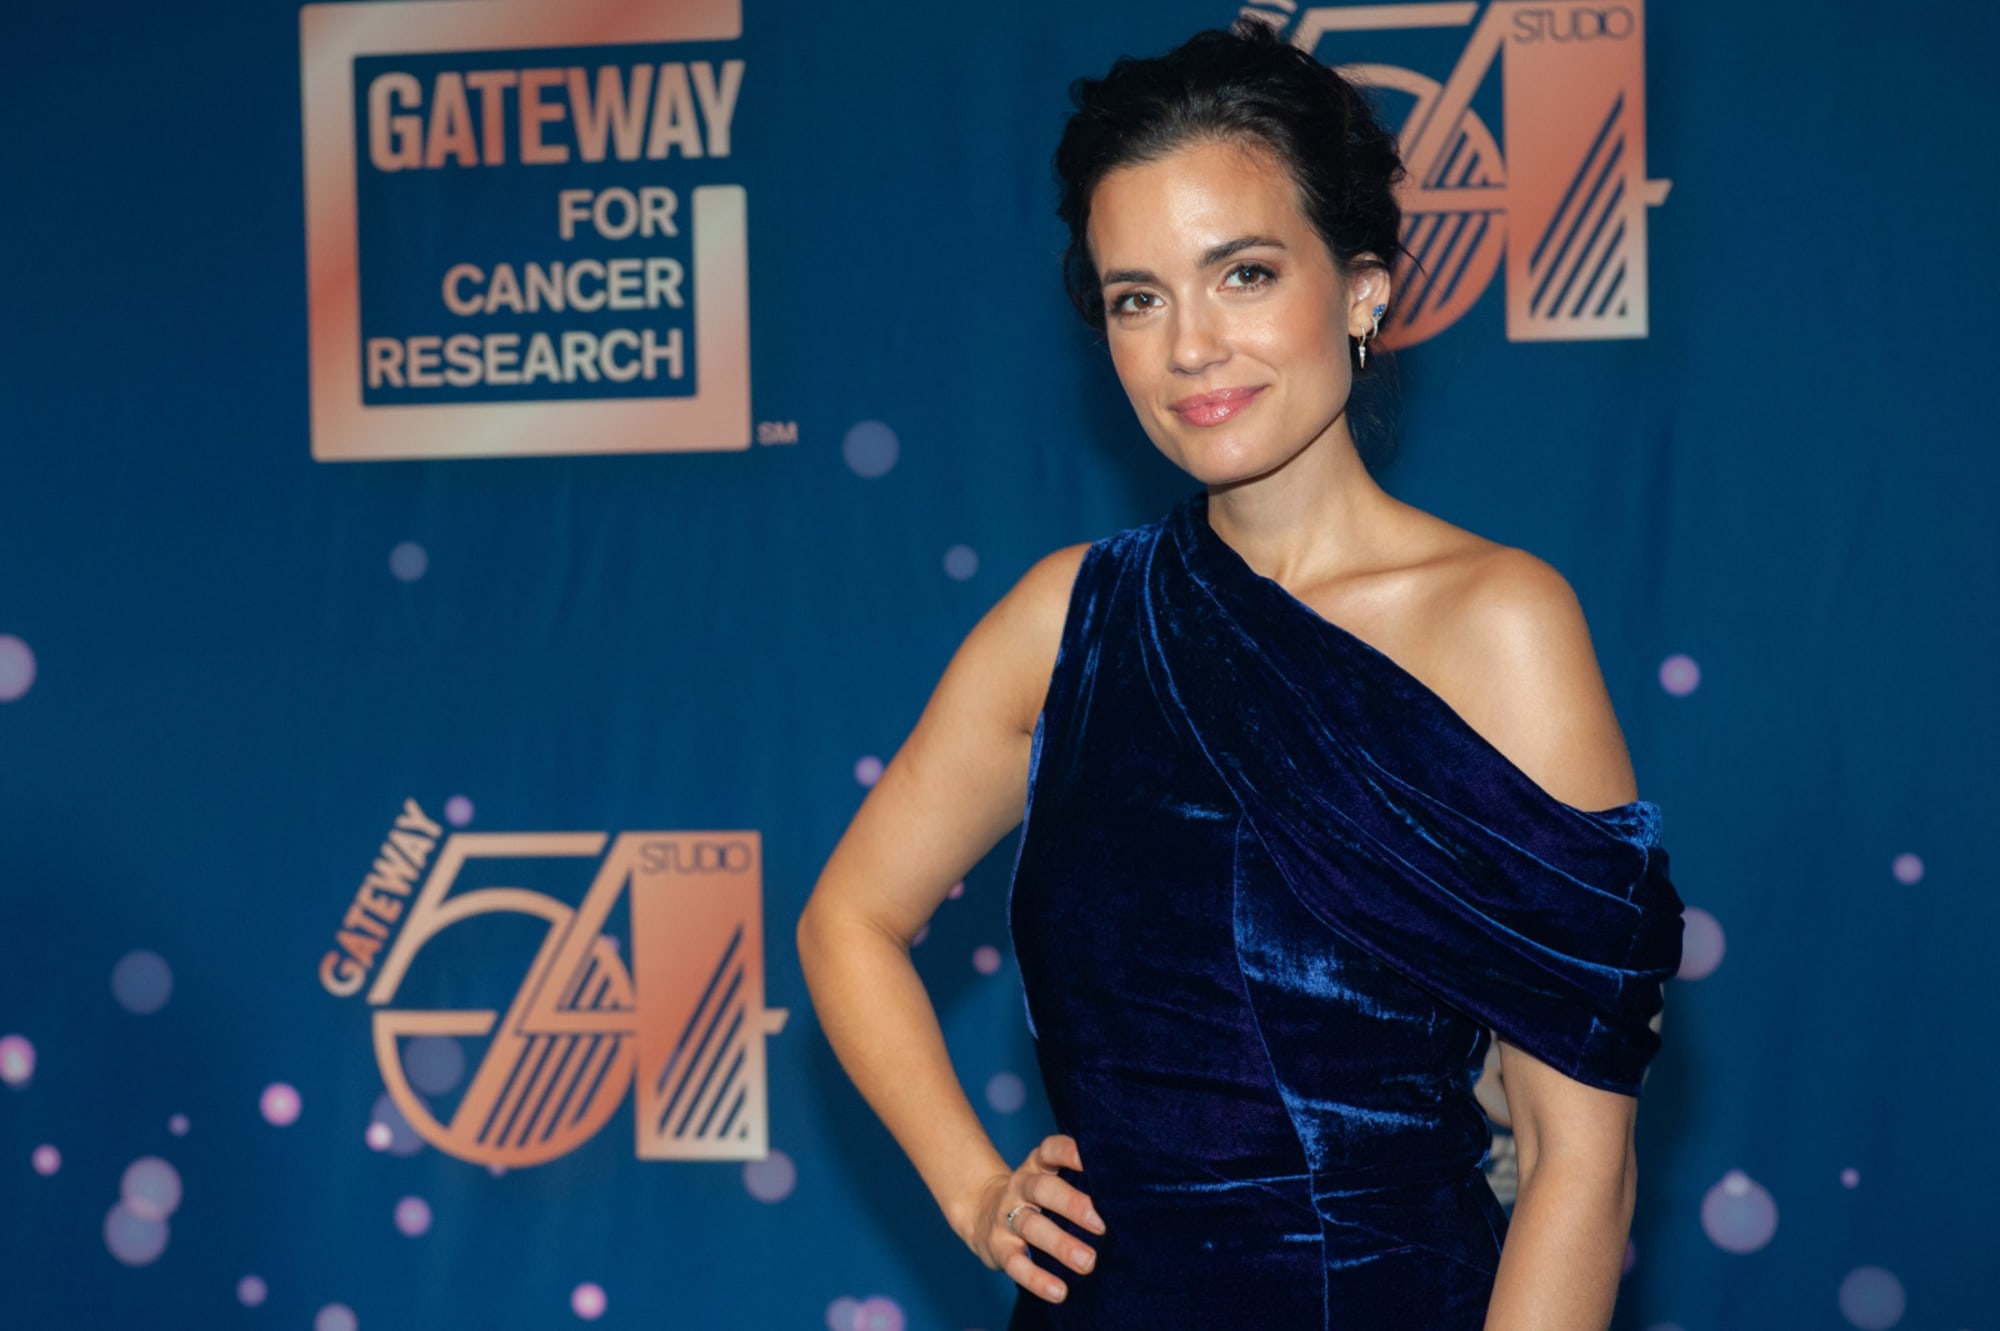 Cubs 'David Ross and Chicago Med's Torrey DeVitto are dating – NBC